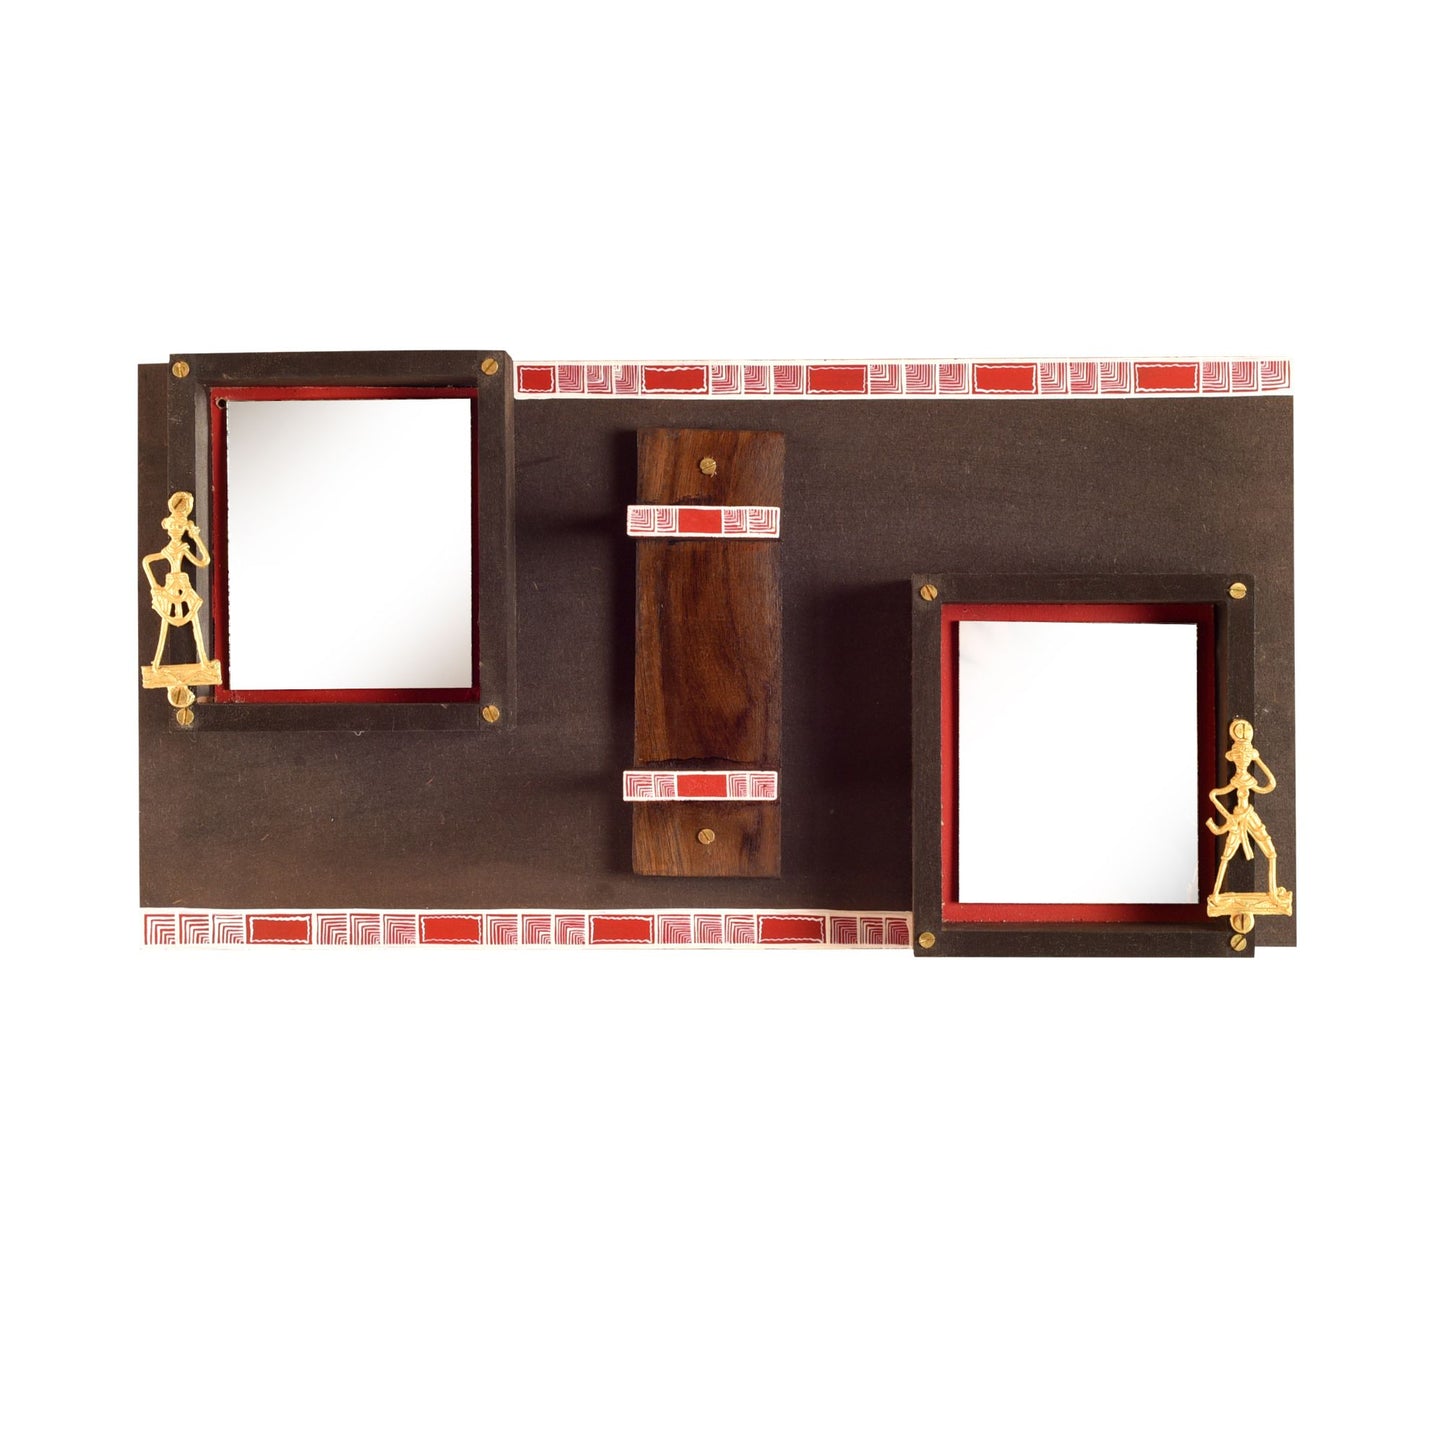 Dhokra Twins Wall Decor Accent Panel